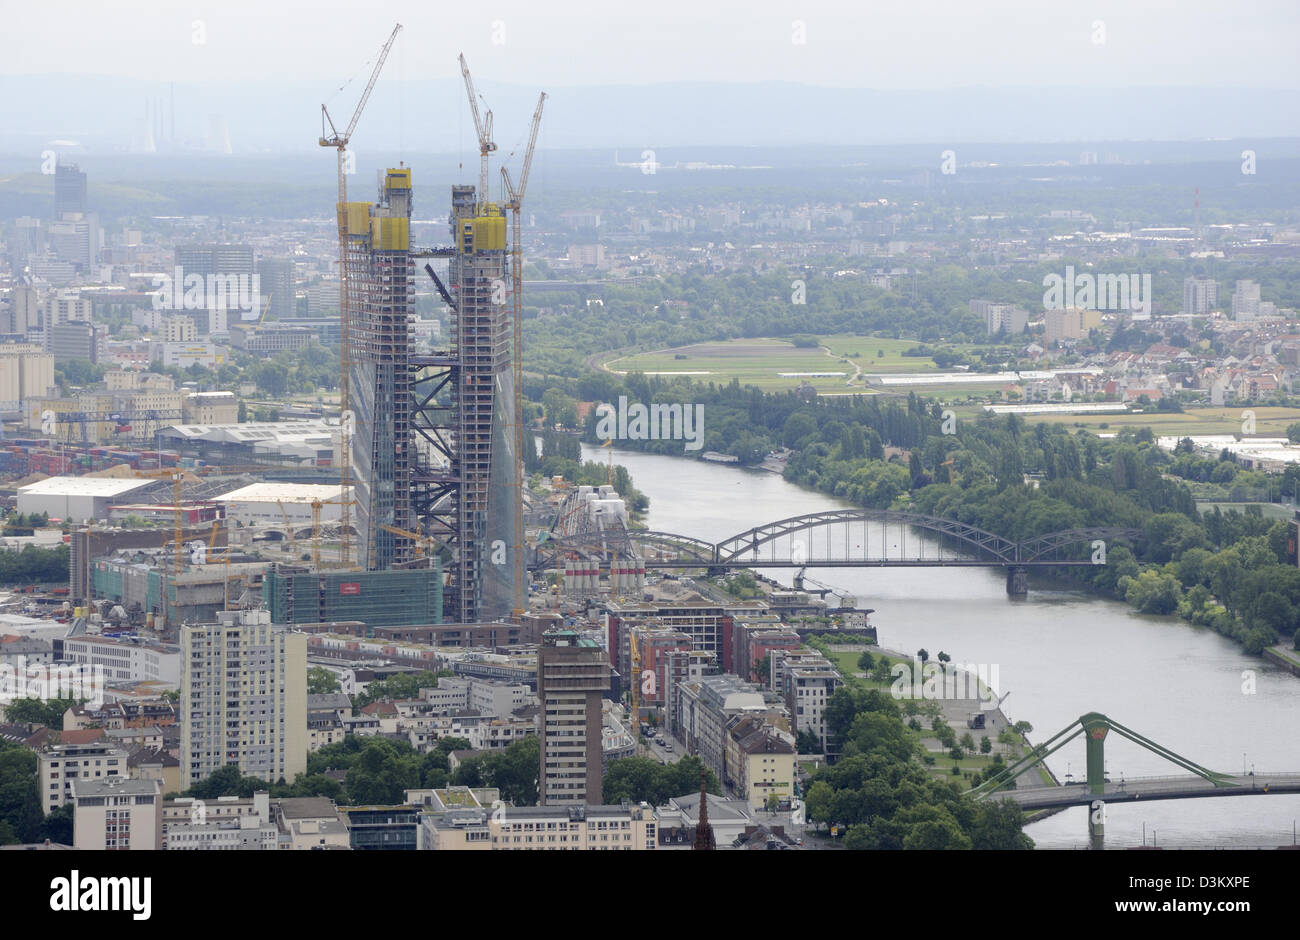 The new European Central Bank Headquarters under construction from the top of the Main Tower, Frankfurt, Germany. Stock Photo